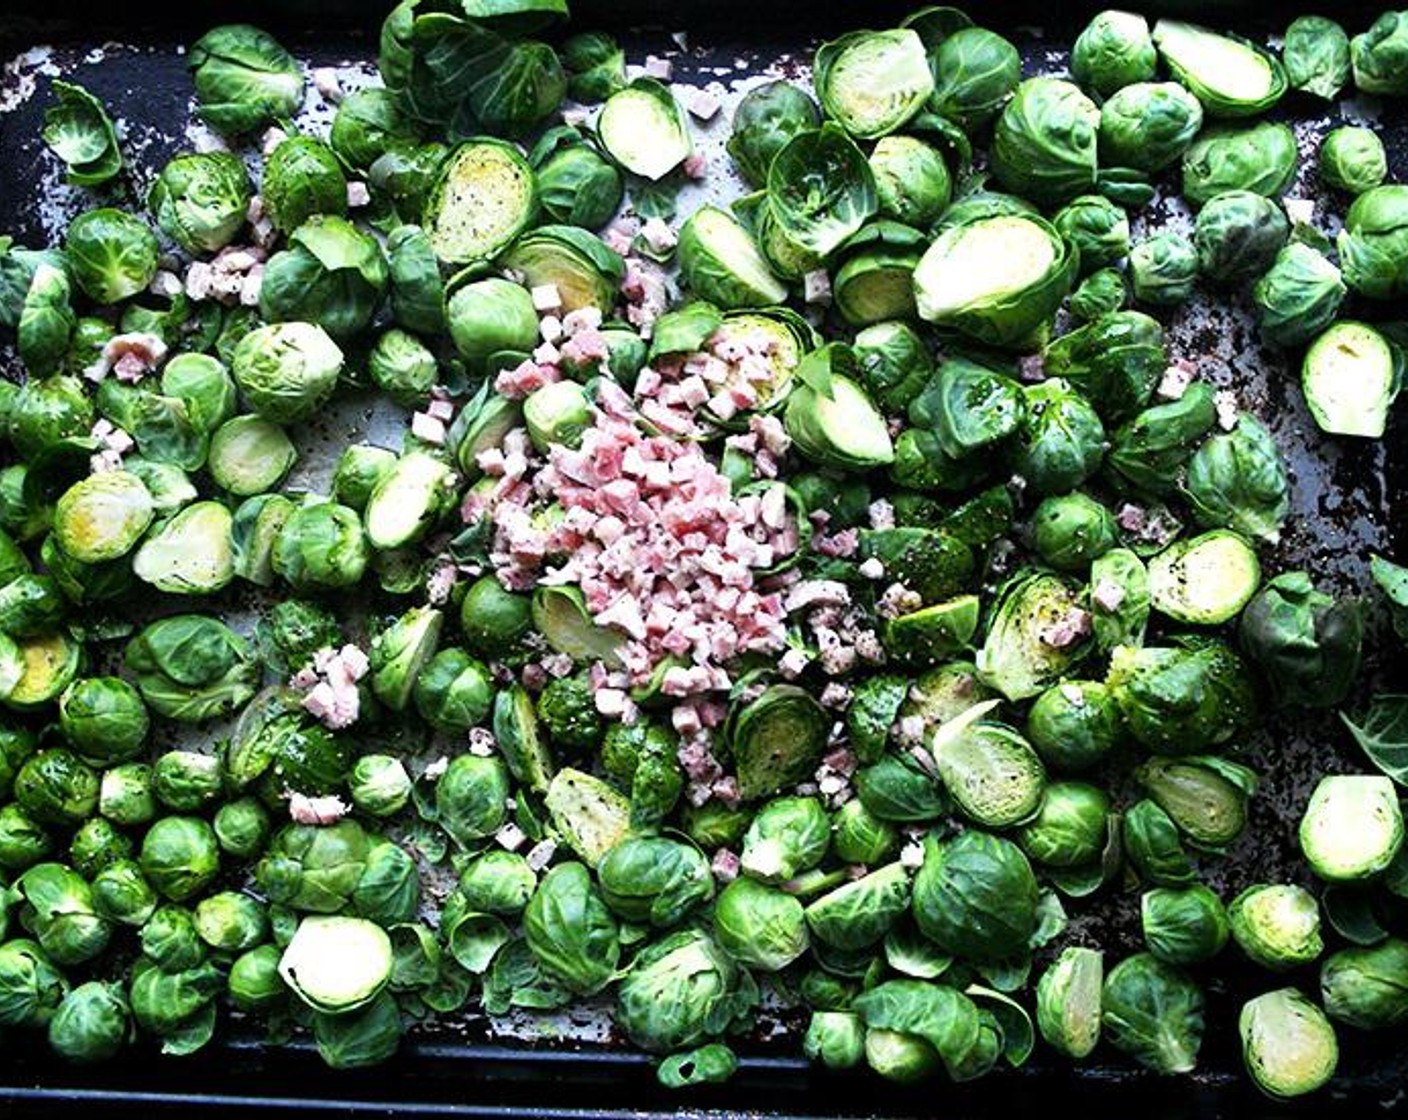 step 2 Place the Brussels Sprouts (5 cups) on a baking sheet, including any of the loose leaves. Cut the Pancetta (1/2 cup) into 1/2-inch dices and add to the pan. Add the Olive Oil (1/4 cup), the Kosher Salt (1/2 tsp) and Freshly Ground Black Pepper (1/2 tsp) and toss with your hands. Spread out the mixture in a single layer.